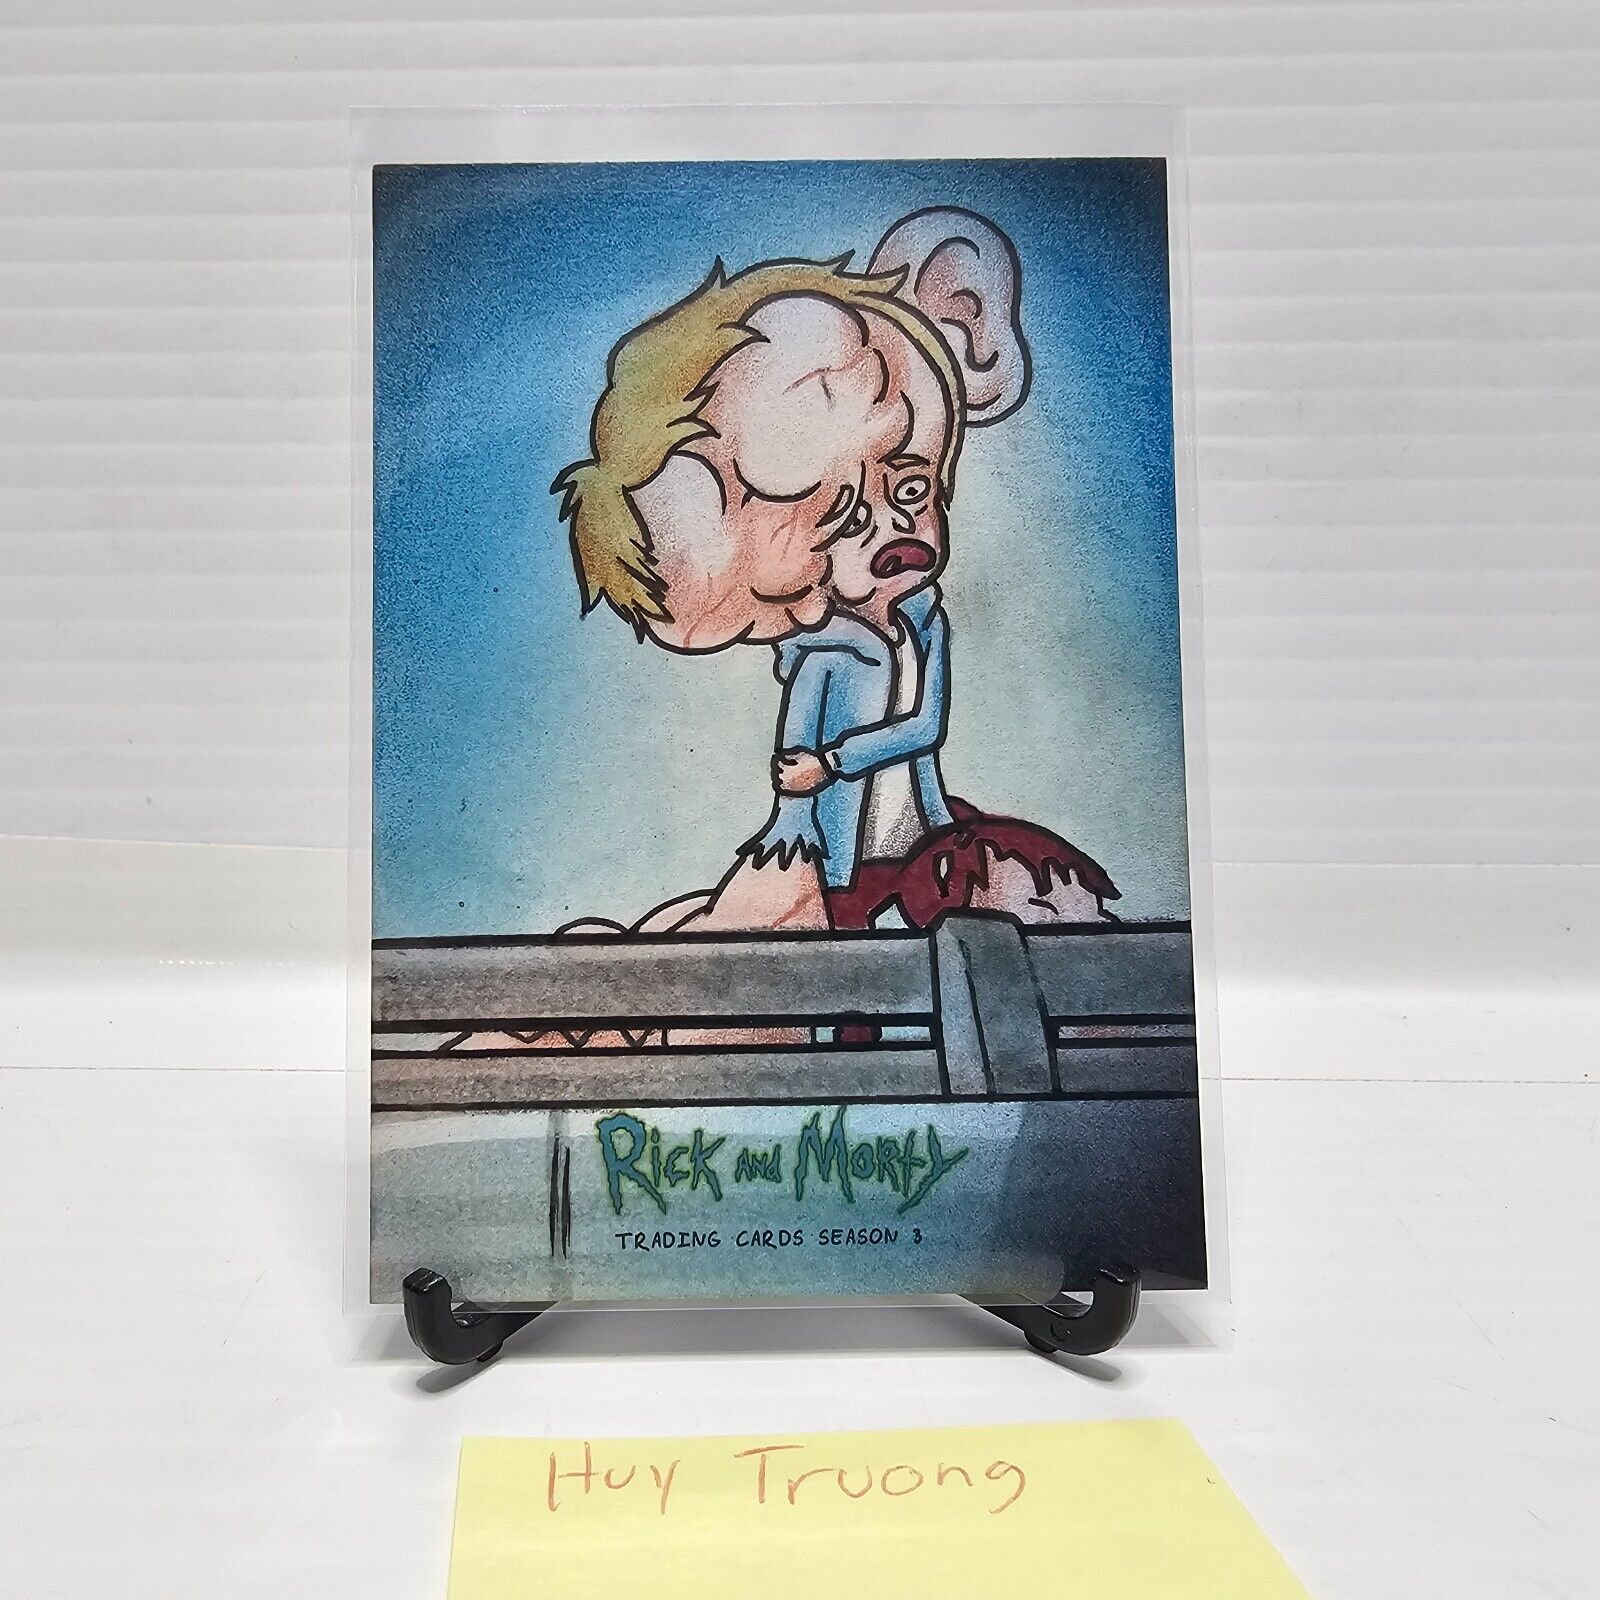 2019 Cryptozoic Rick & Morty Season 3 Sketch Cards MORPHED ETHAN 1/1 Huy Truong